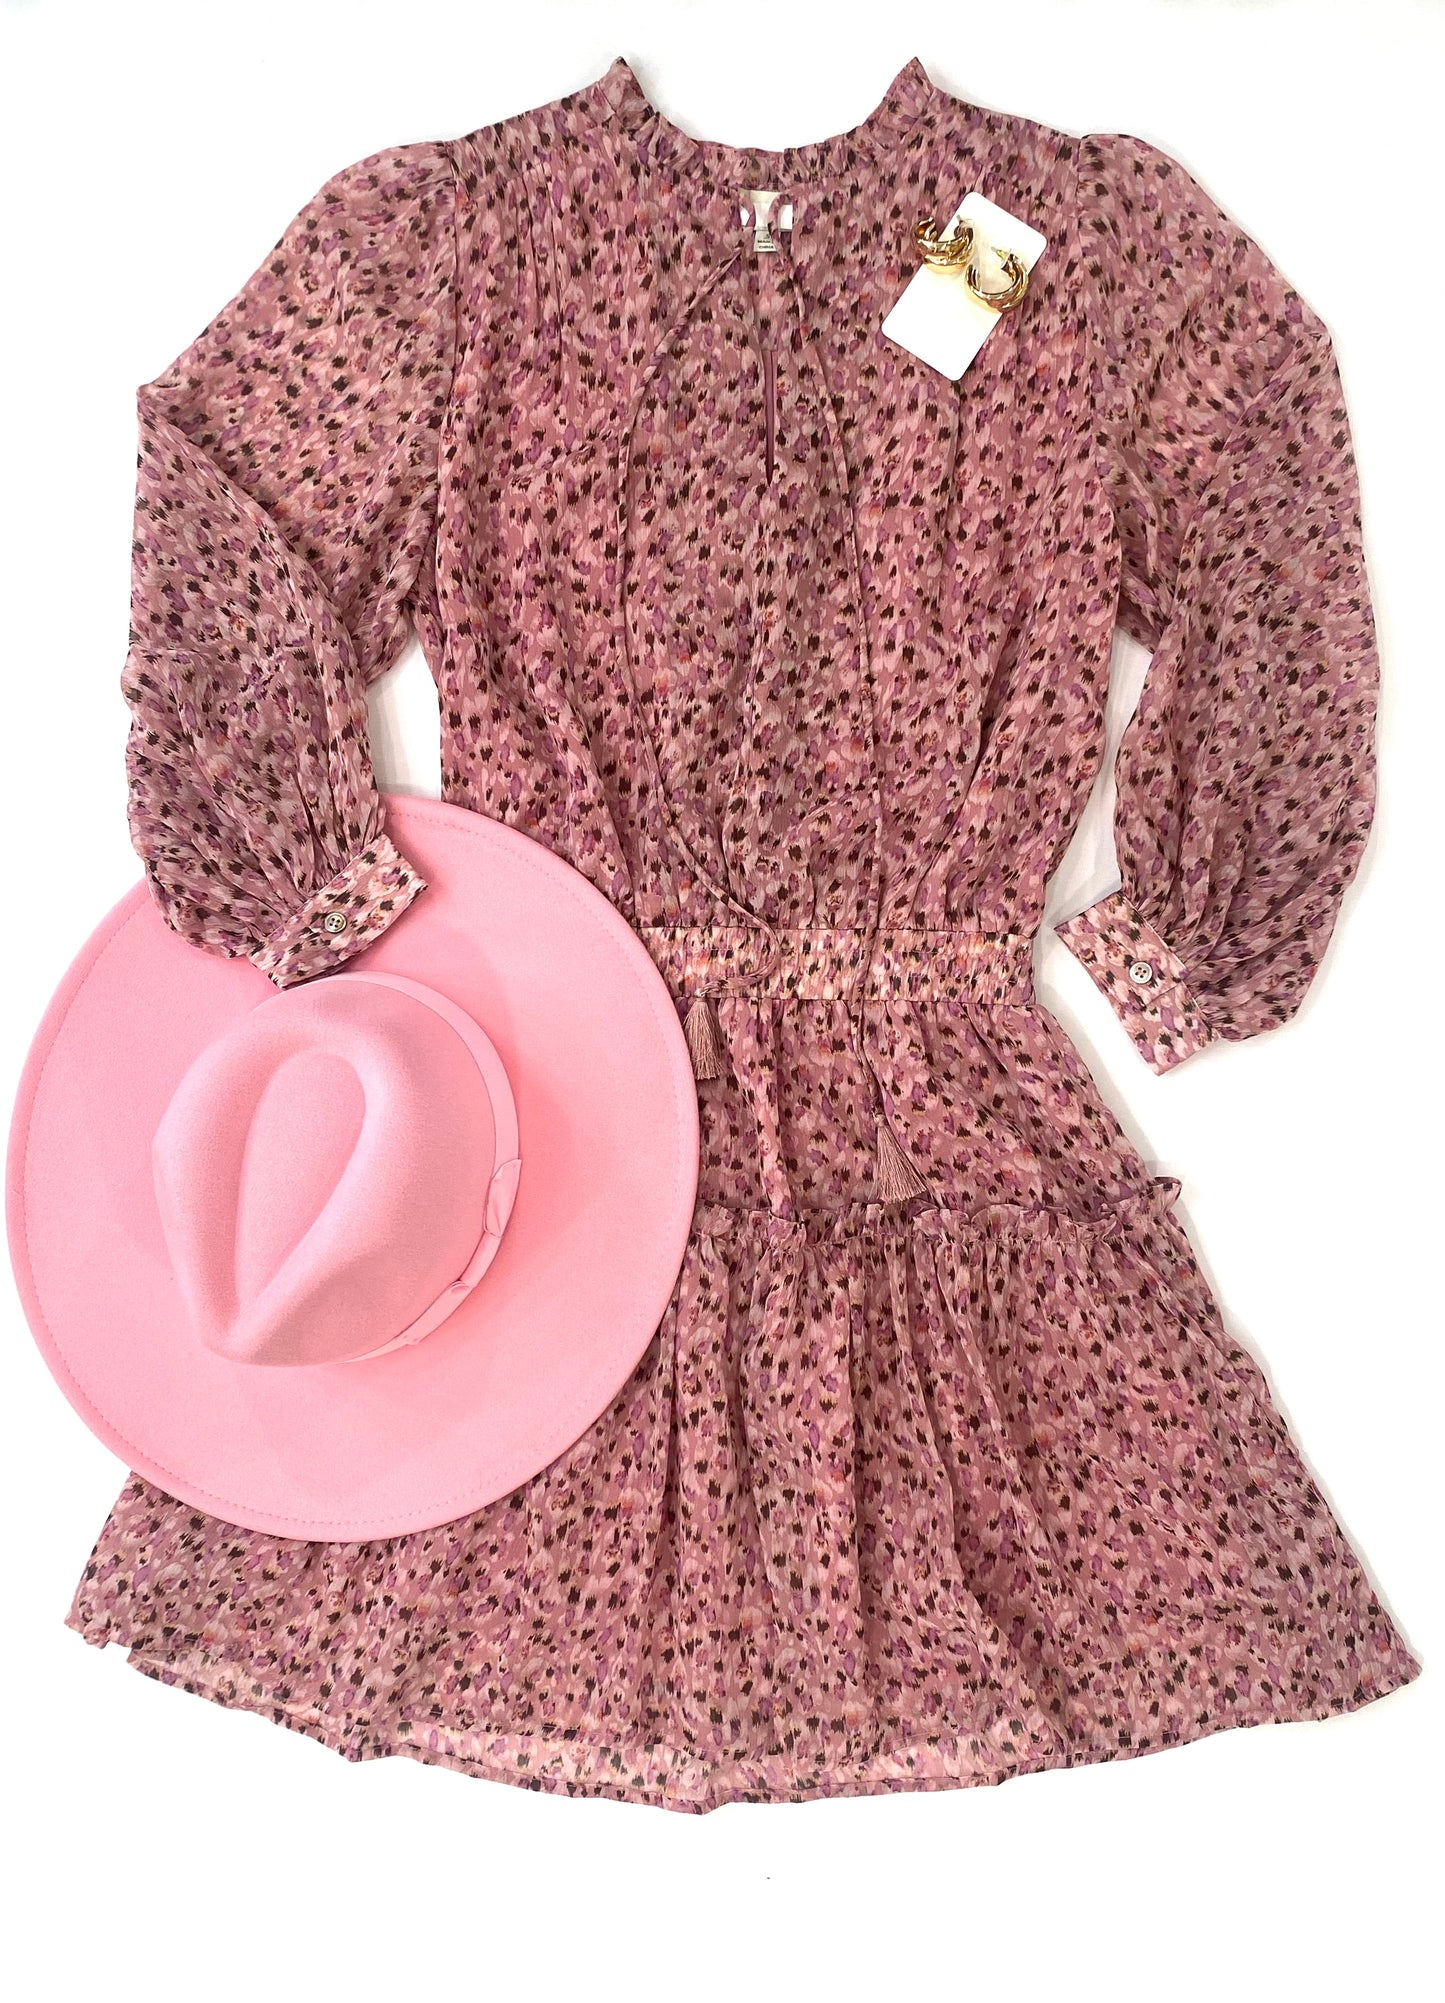 Spotted Pink and Brown Pinched Dress